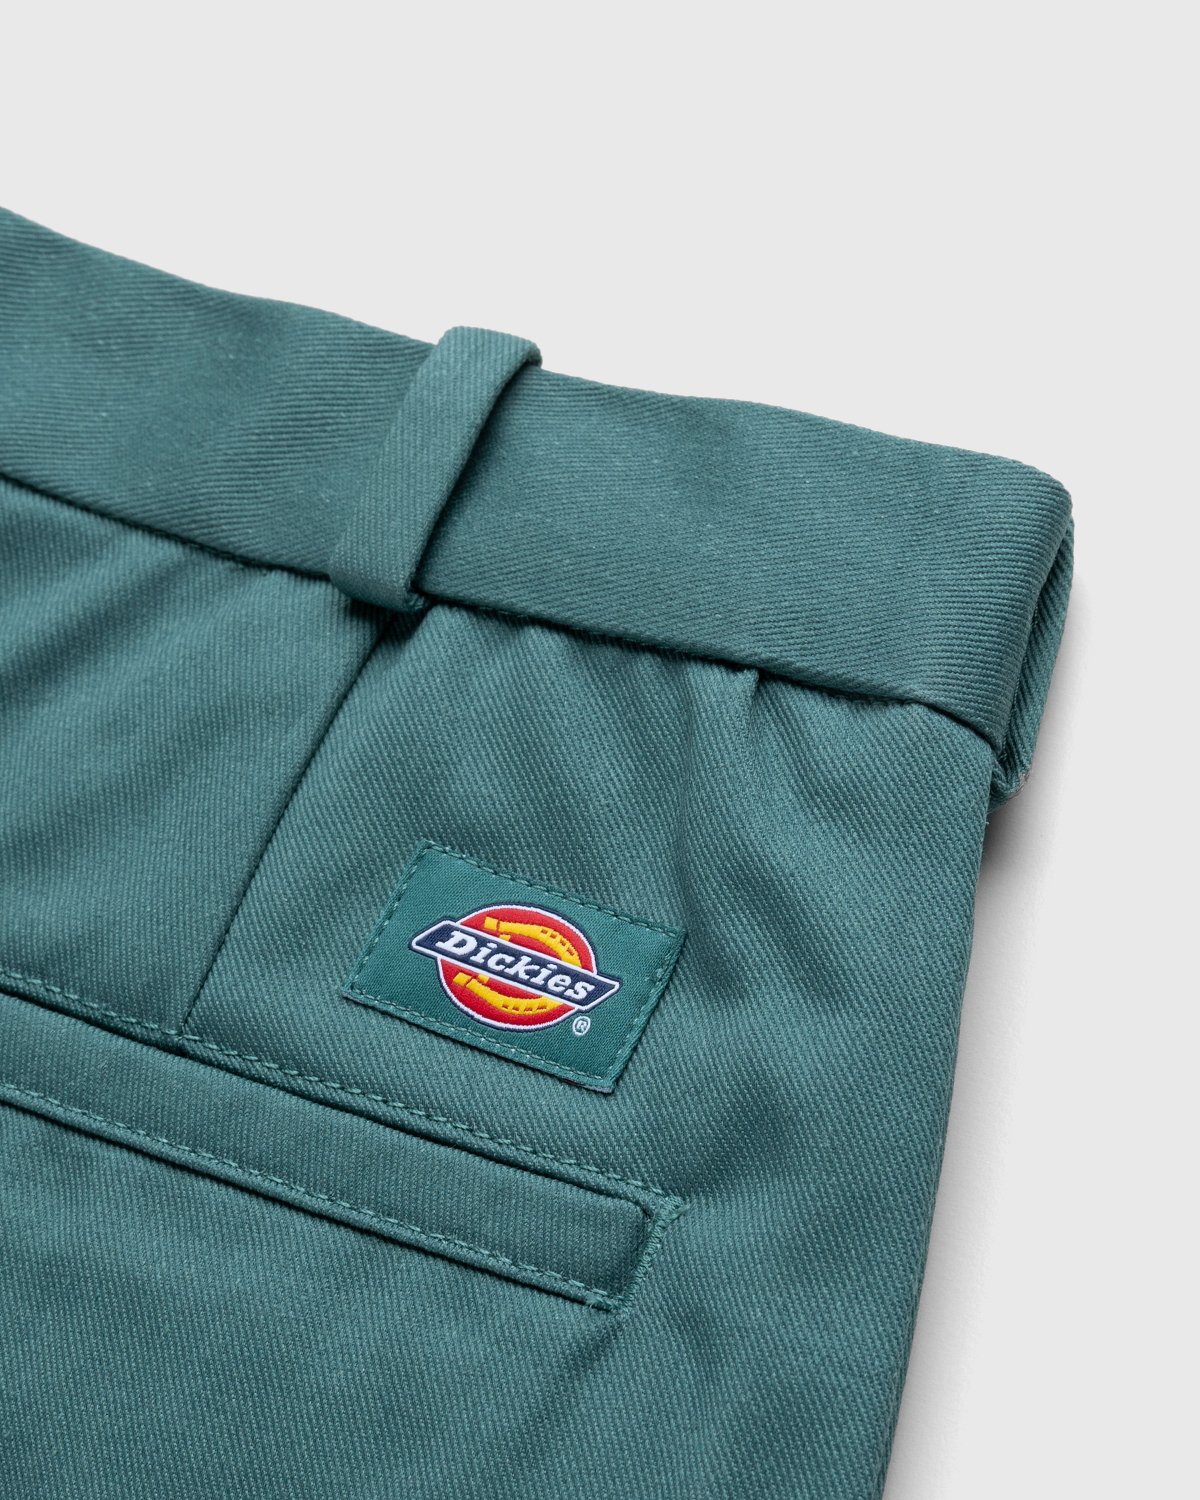 Highsnobiety x Dickies - Pleated Work Pants Lincoln Green - Clothing - Green - Image 5